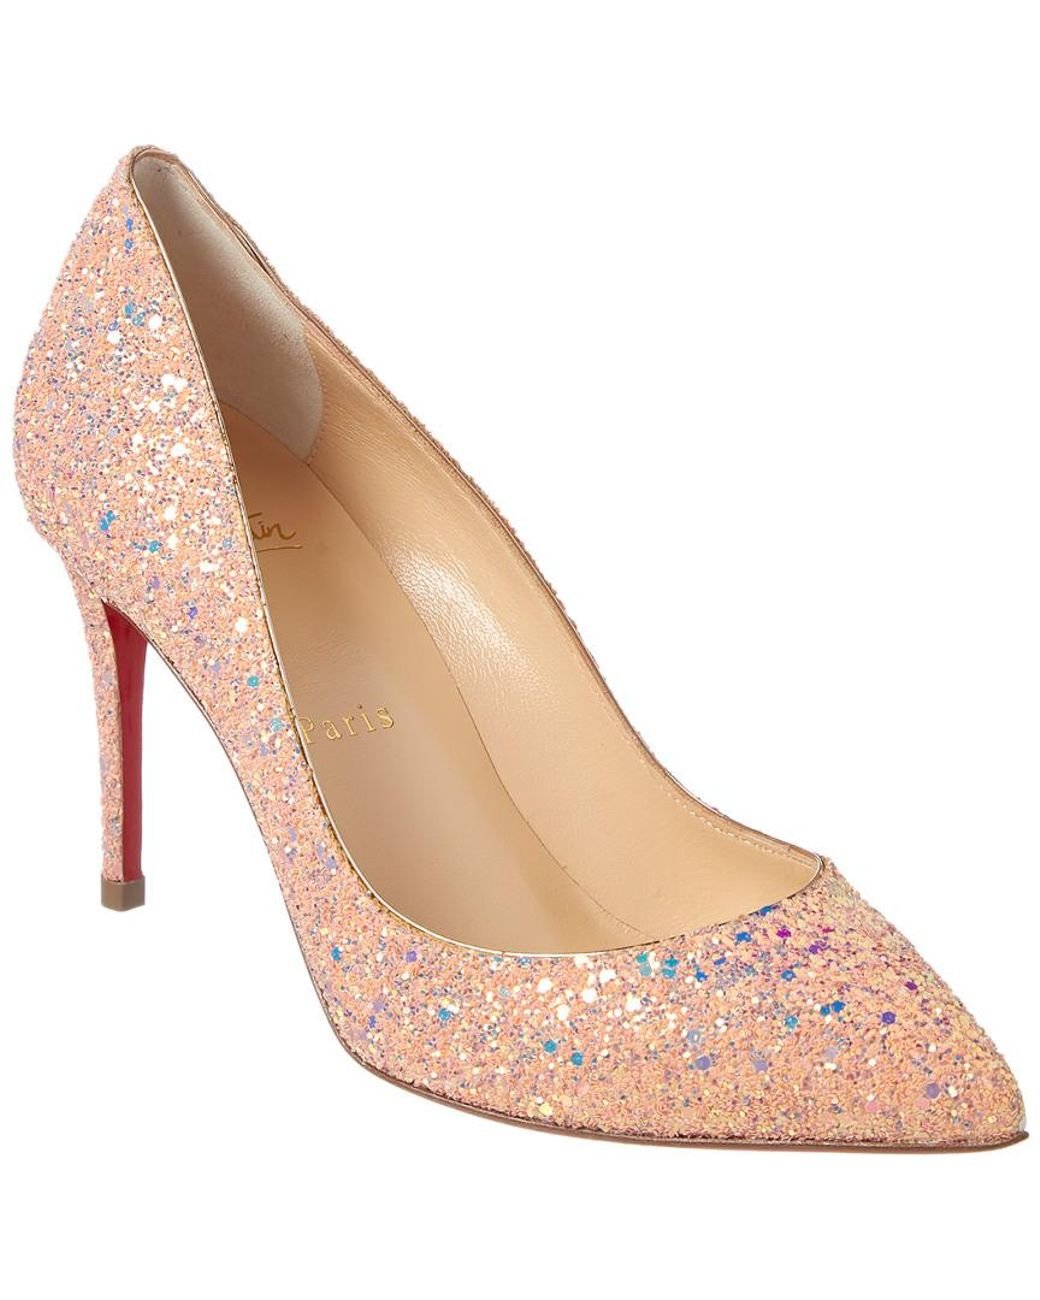 Christian Louboutin Shoes, Glitter Pigalle Follies Dragonfly 85 Pumps (size  40.5)